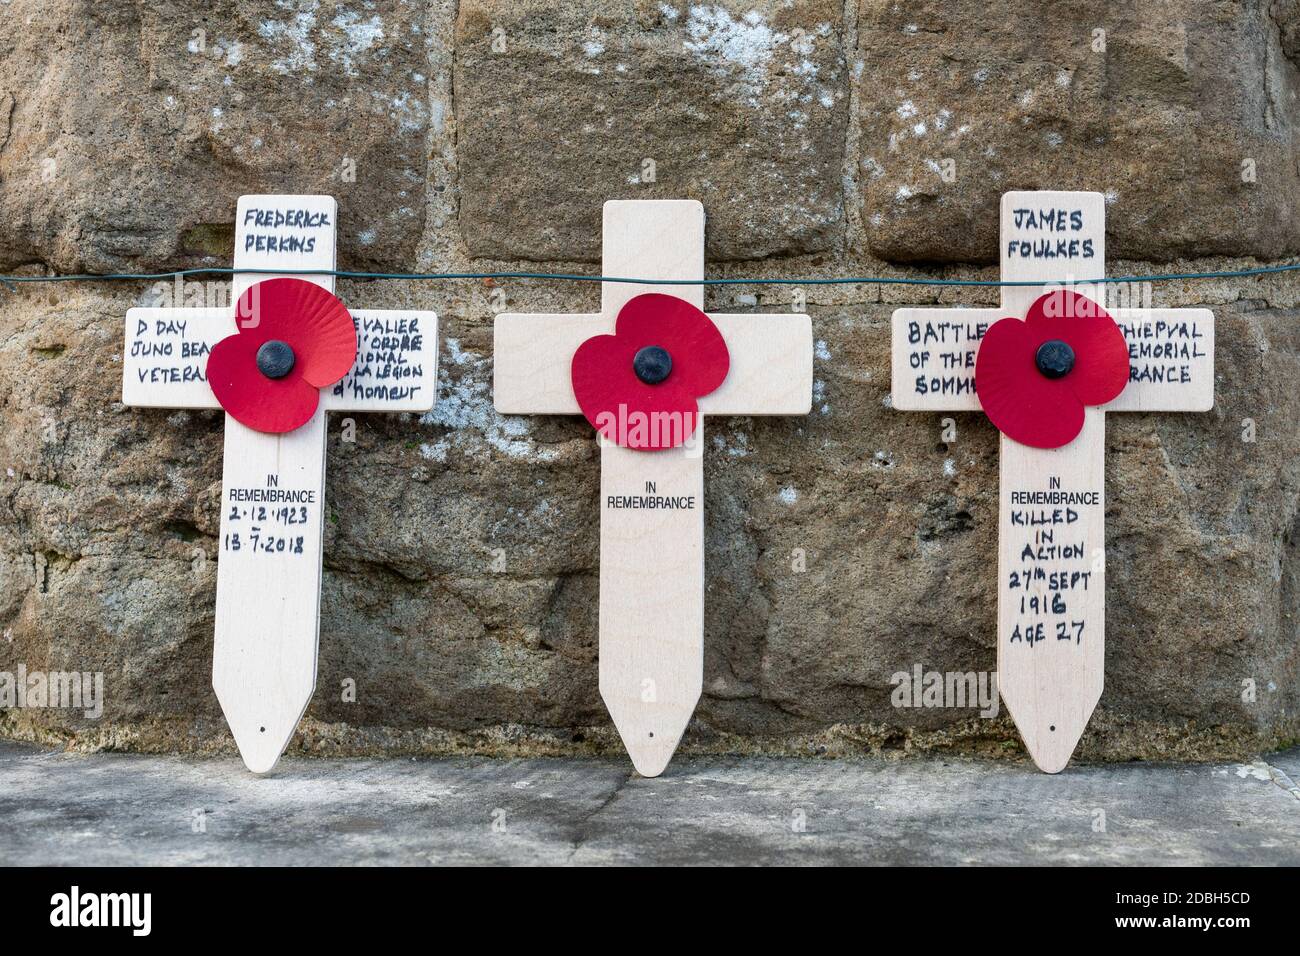 Three poppy crosses placed around a war memorial to commemorate remembrance day or armistice, UK Stock Photo